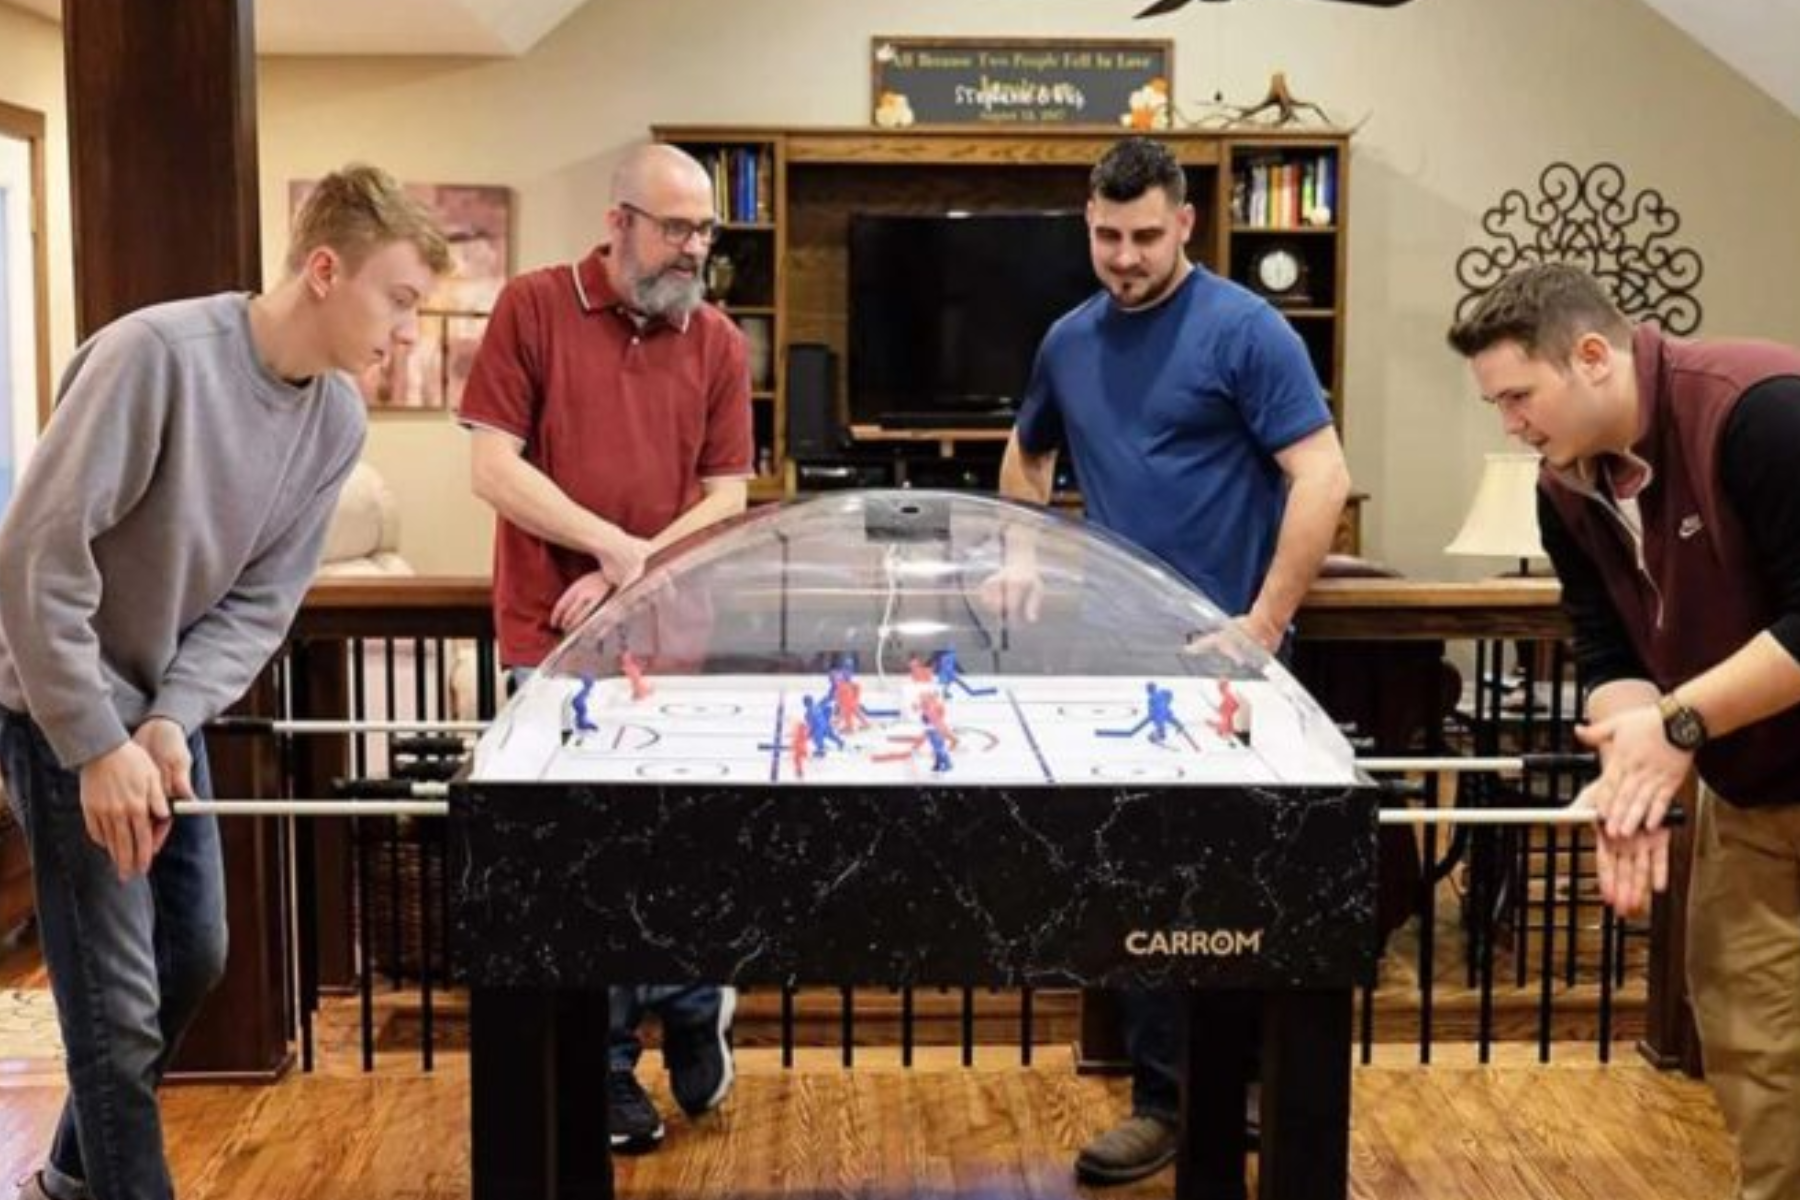 Four individuals gathered around a Bubble Hockey table. Two of them are actively playing the game while the other two are observing the match